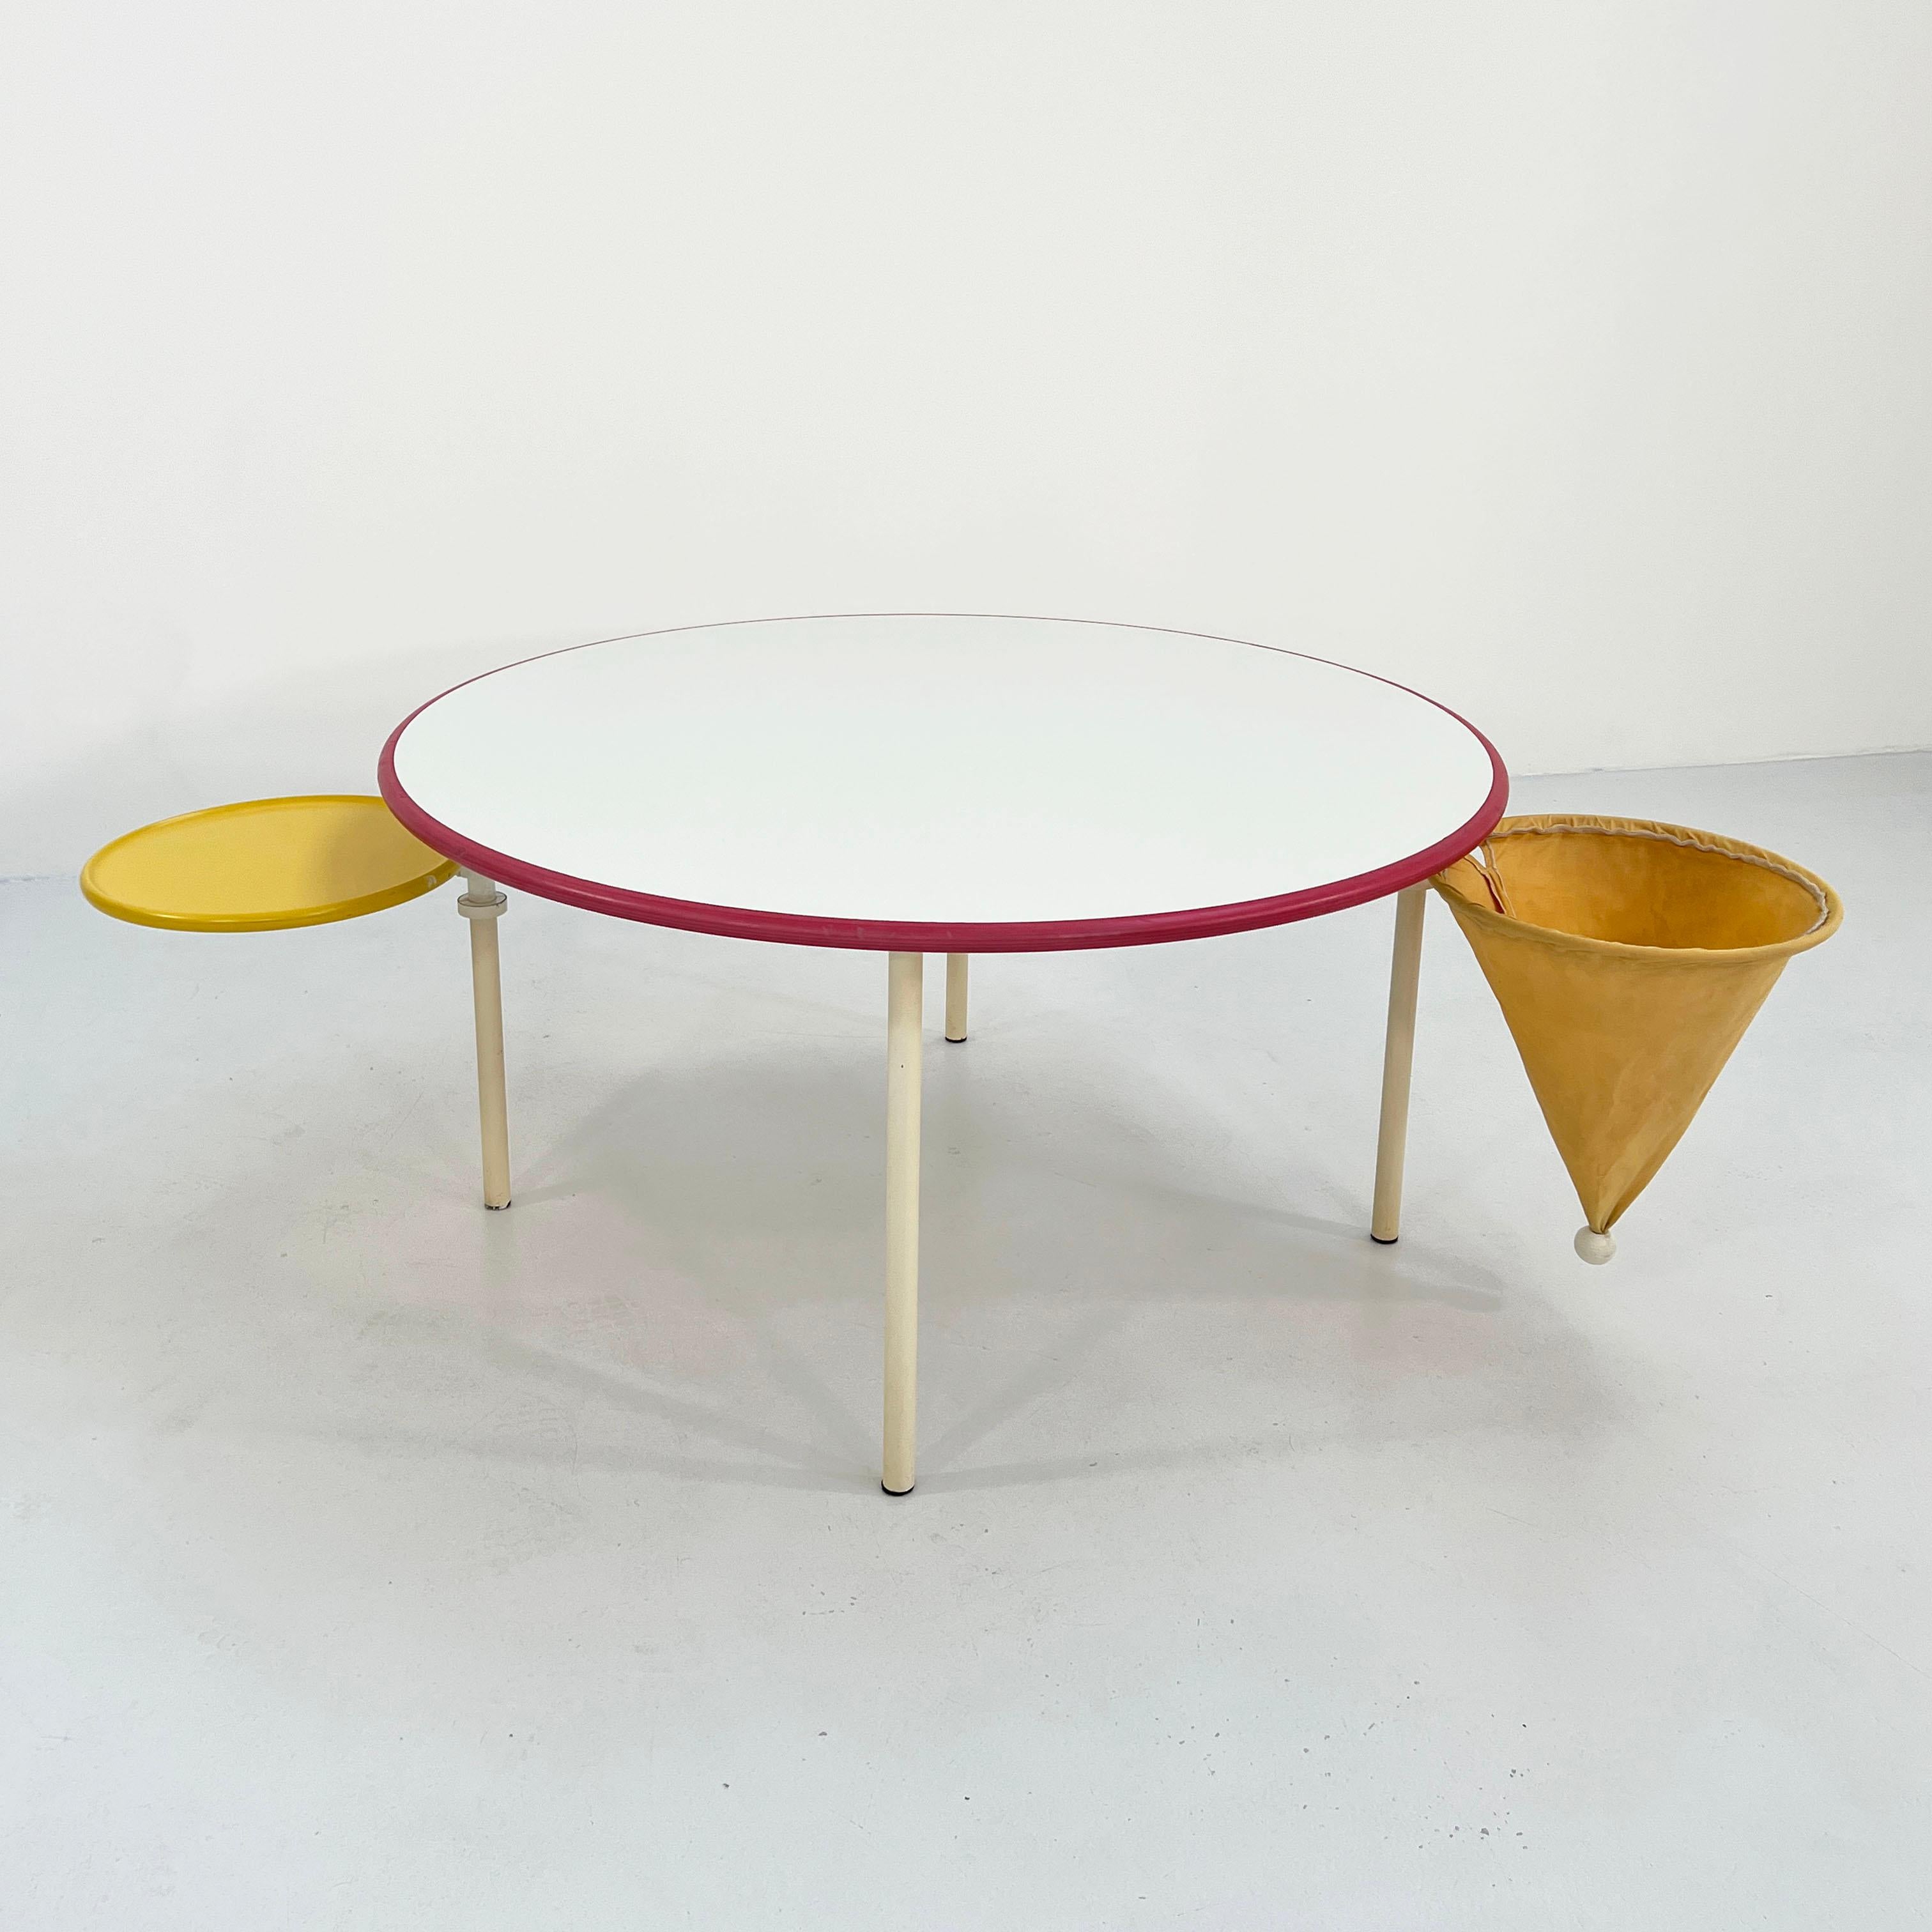 Postmodern Kids Table from Poliform, 1980s
Producer - Poliform
Design Period - Eighties 
Measurements - width 120 cm x depth 120 cm x height 60 cm
Materials - Wood, Metal, Plastic
Color - Red, Yellow, White
??????Condition - Good 
Comments -